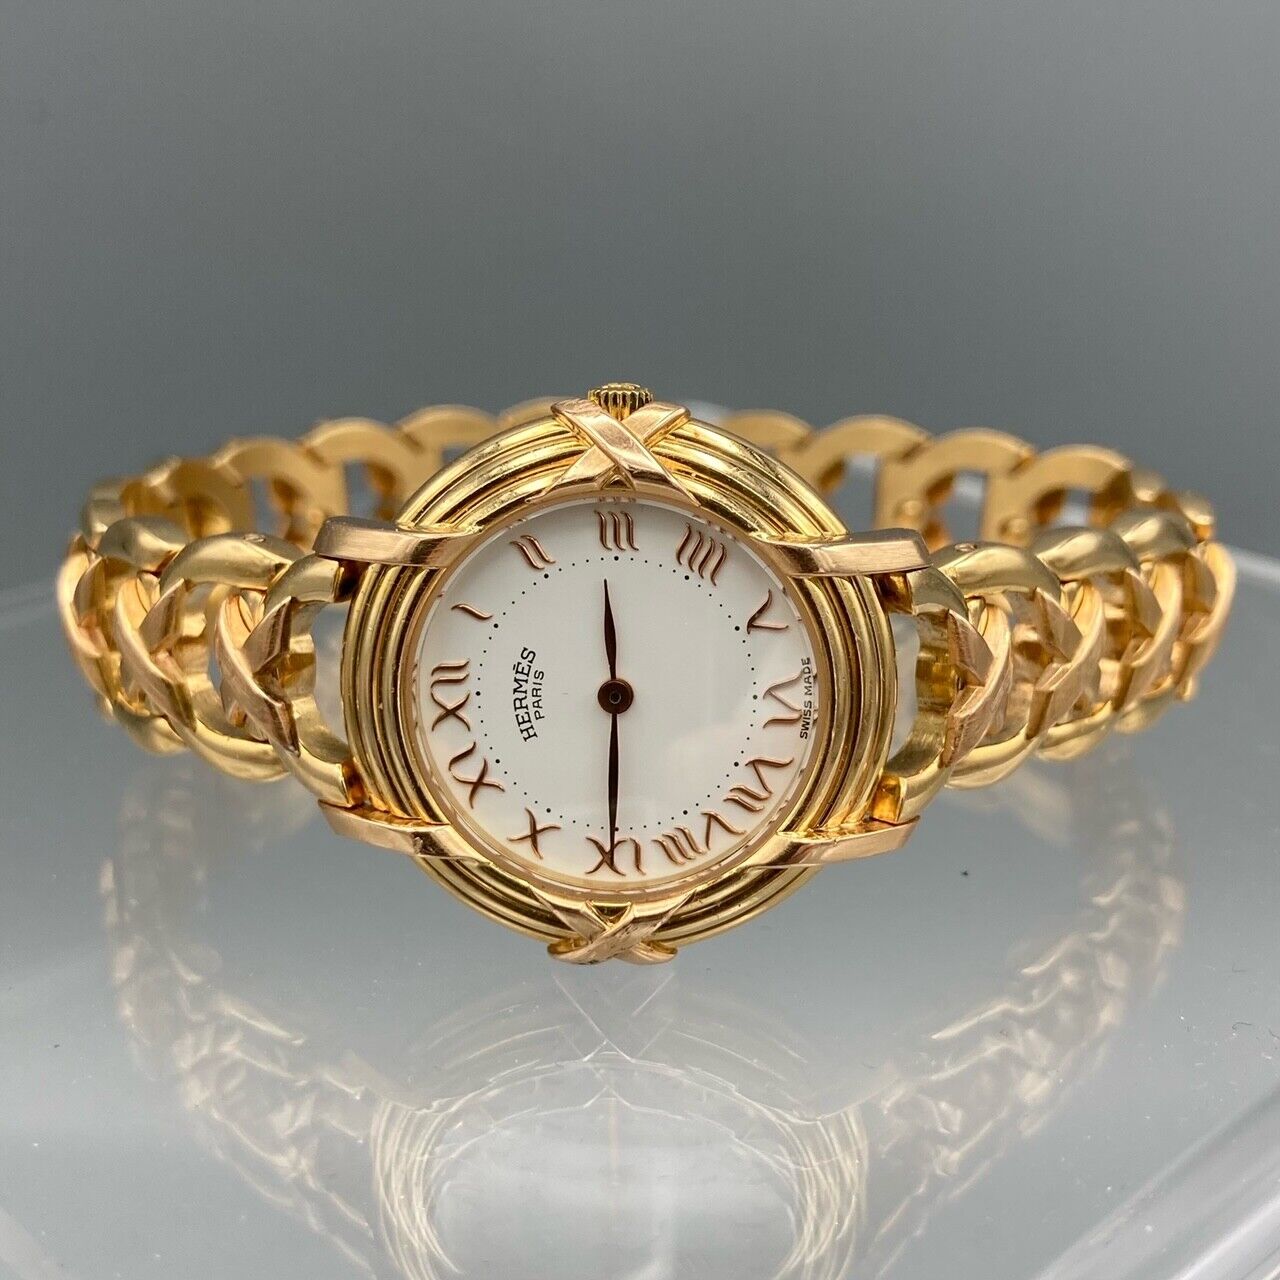 Hermes 18k Yellow and Rose Gold Ruban Watch